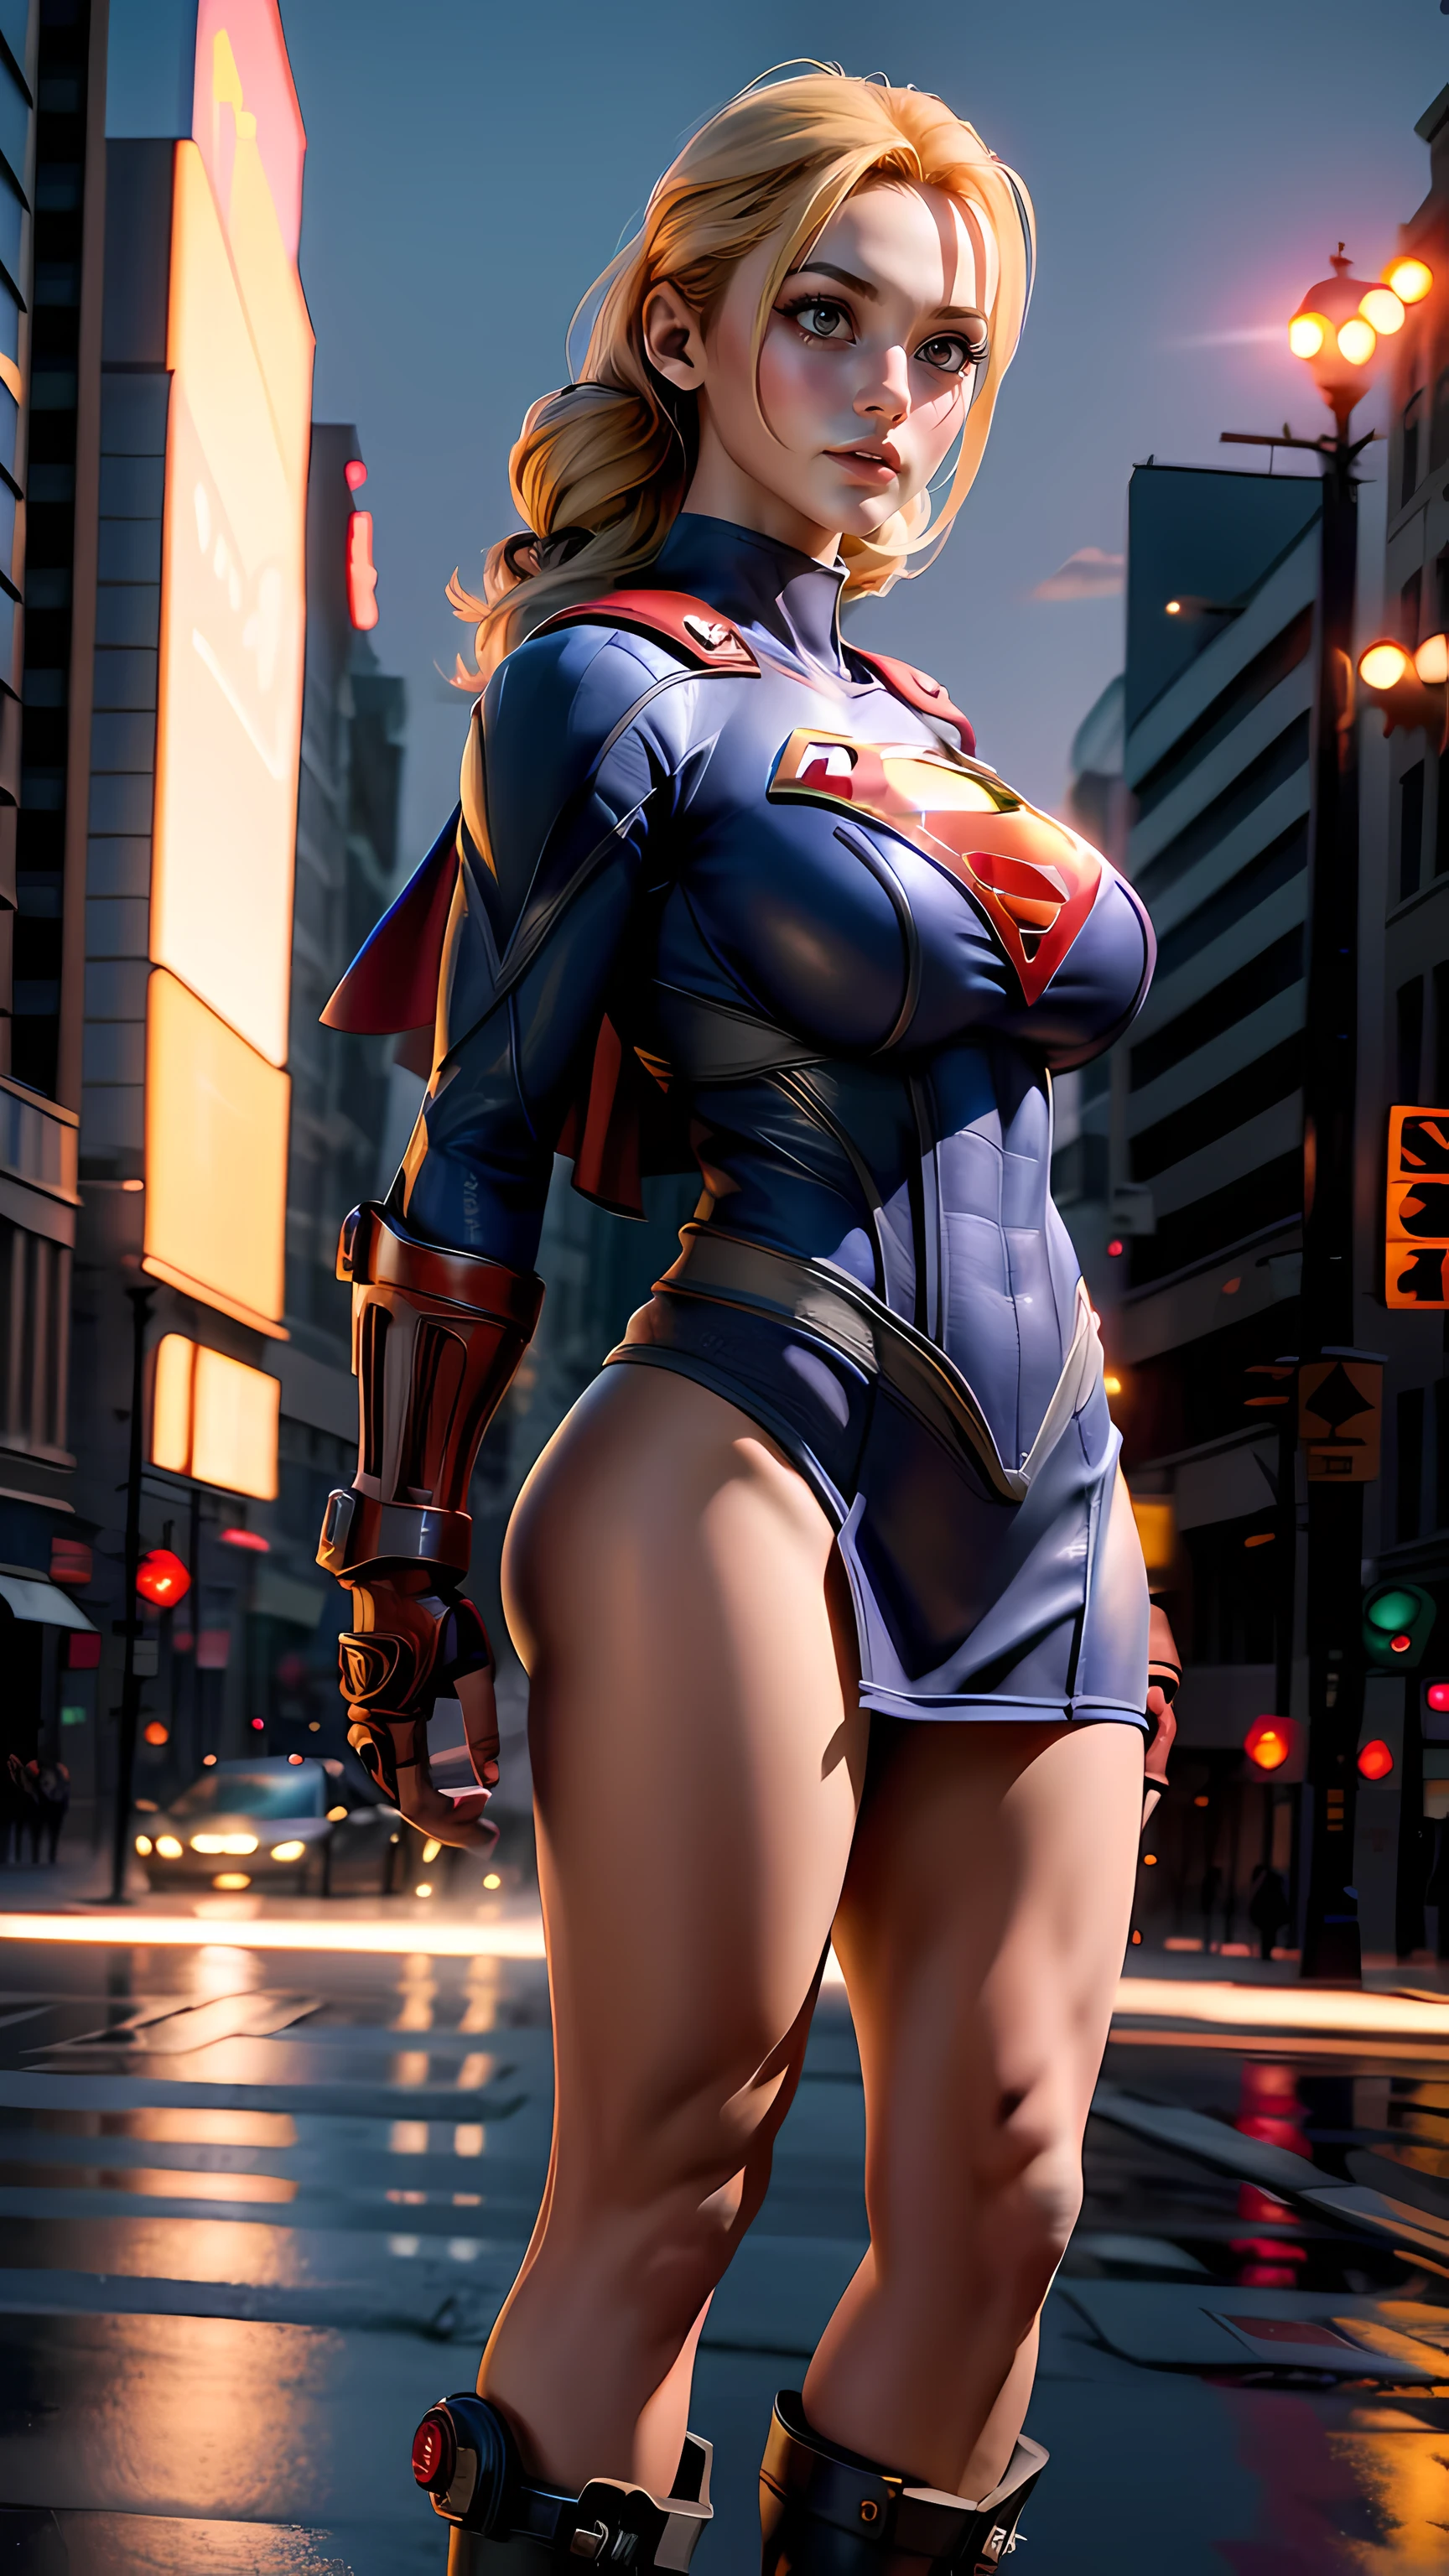 (supergirl outfit), ((Best quality)), ((Masterpiece)), ((Realistic)) and ultra-detailed photography of a Cammy, (realistic:1.2), (realism), (masterpiece:1.2), (best quality), (ultra detailed),(8k, 4k, intricate),light particles, lighting, (highly detailed:1.2),,supergirl outfit, (big breasts:1.4), outdoor, city landscape, full body, (realistic:1.2), (realism), (masterpiece:1.2), (best quality), (ultra detailed),(8k, 4k, intricate),light particles, lighting, (highly detailed:1.2),
